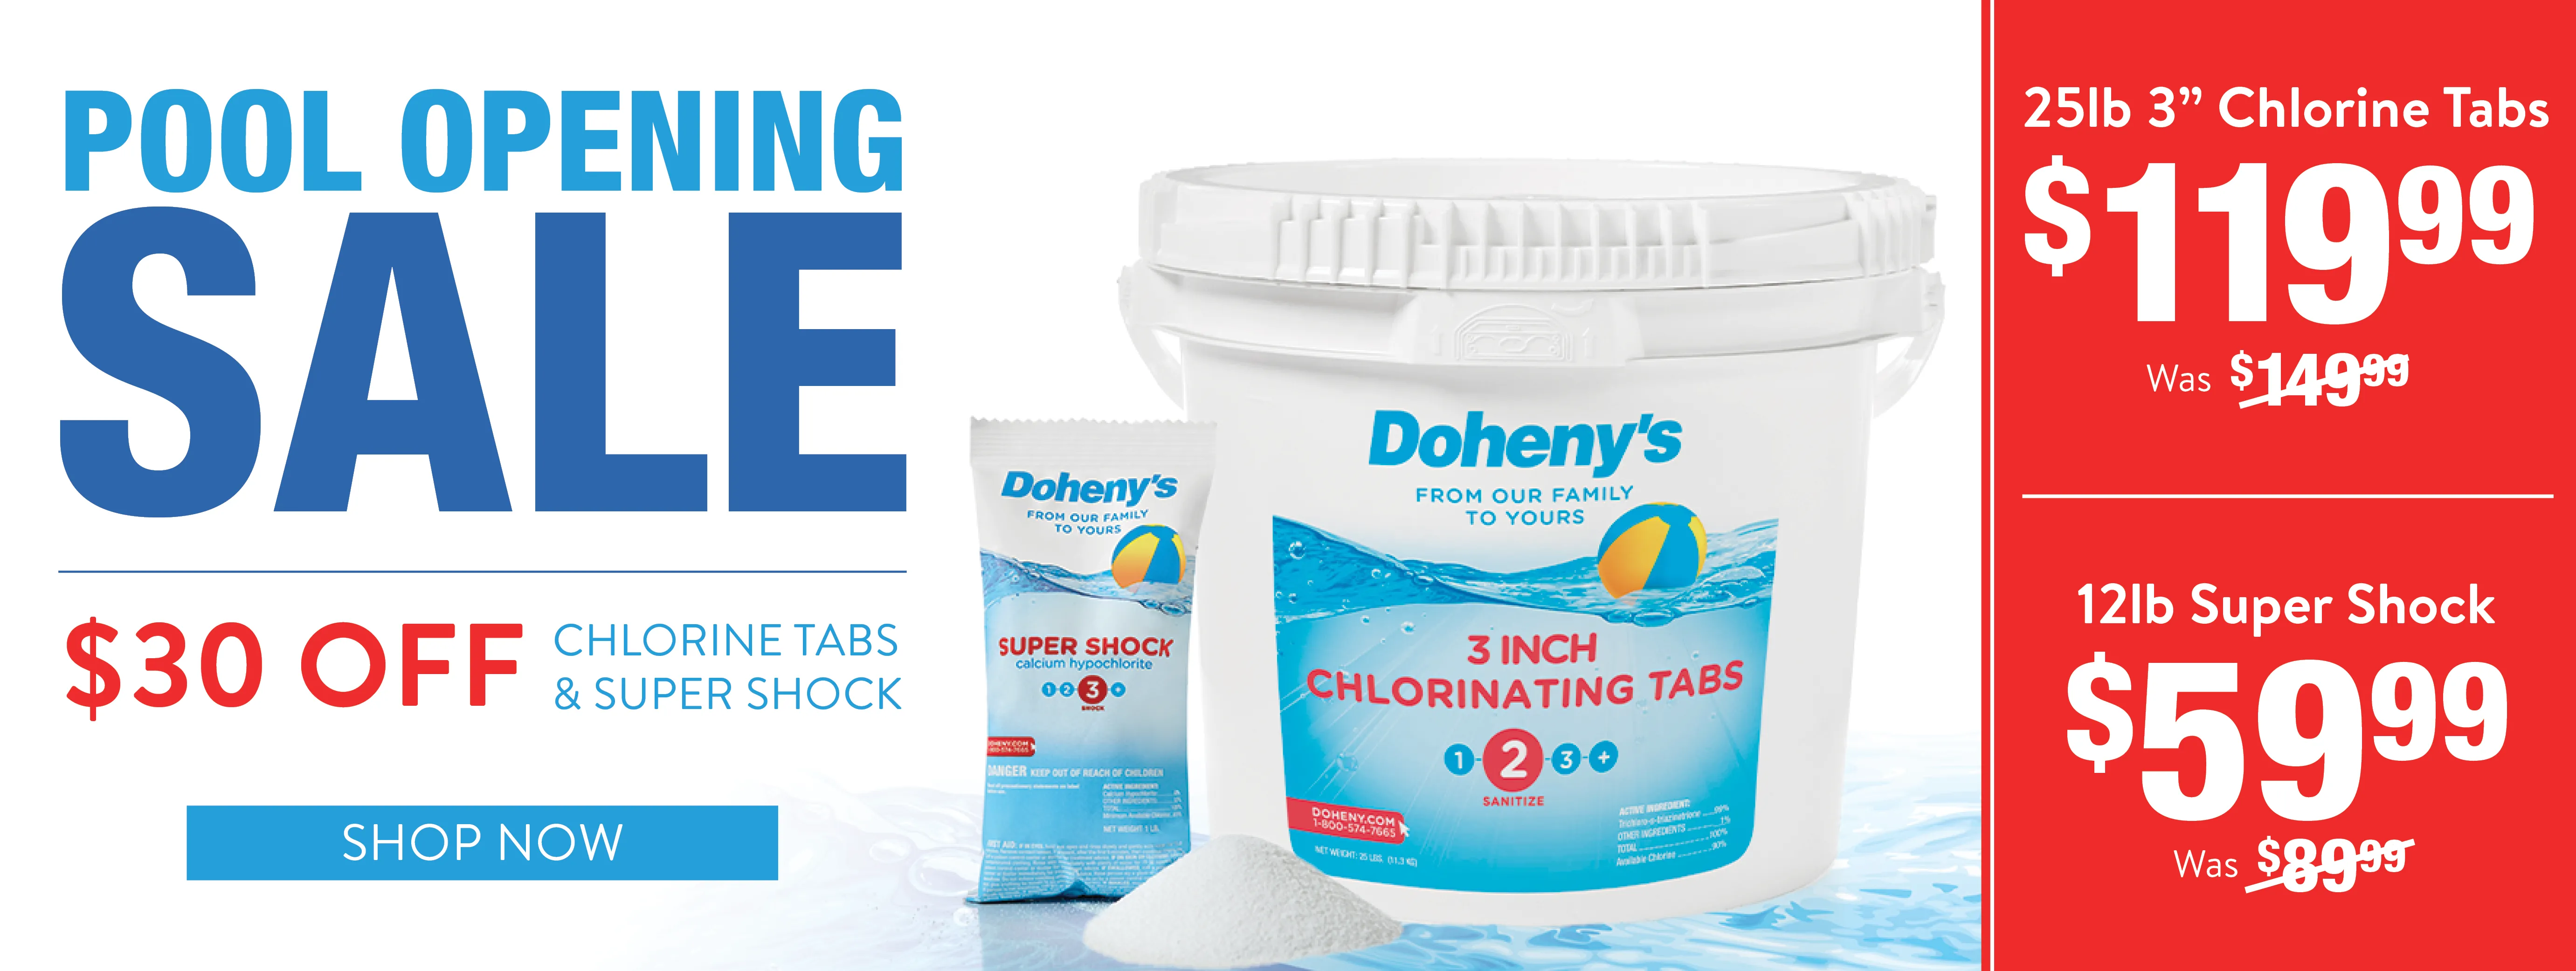 Pool Opening Sale $30 Off Chlorine 3-Inch Tabs 25 lb Low as $119.99 & Super Shock 12lb Low as $59.99. Shop now.